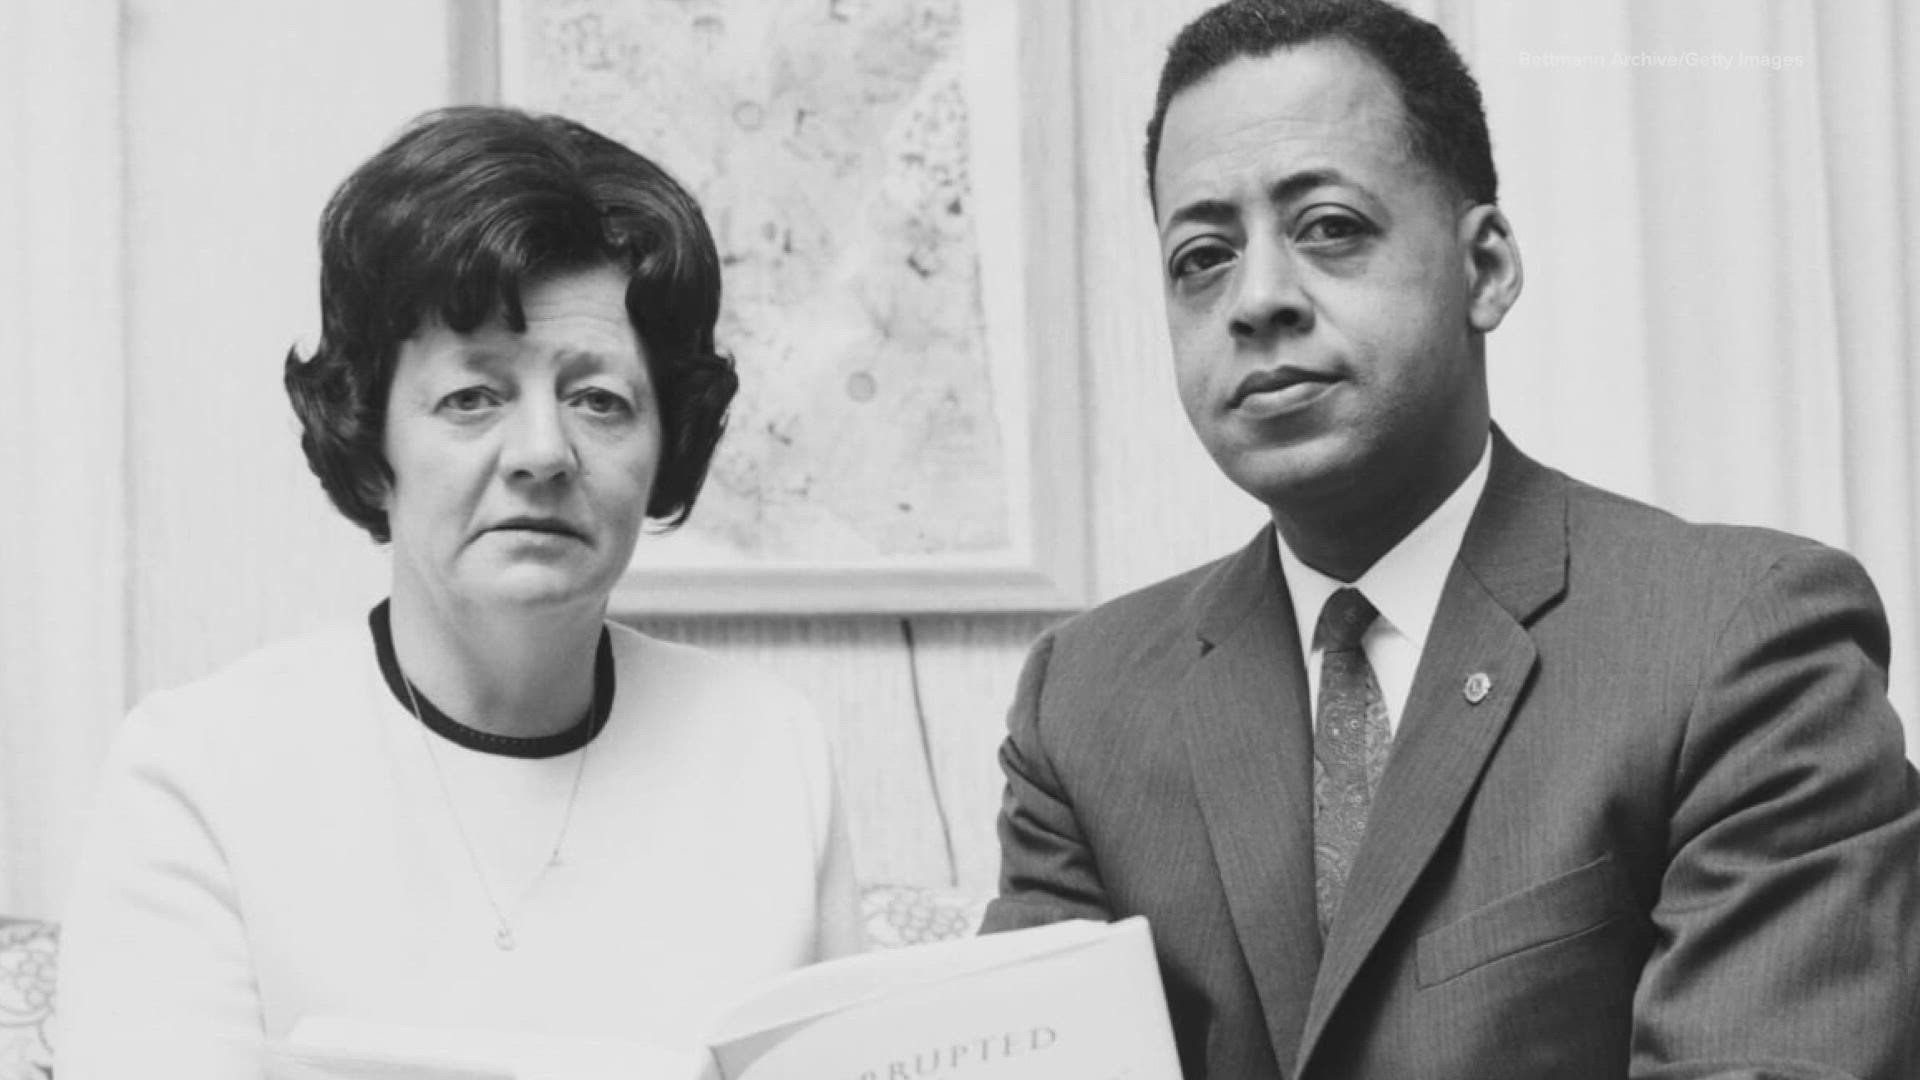 The case of Betty and Barney Hill was the first widely publicized report of and alien abduction in the U.S.